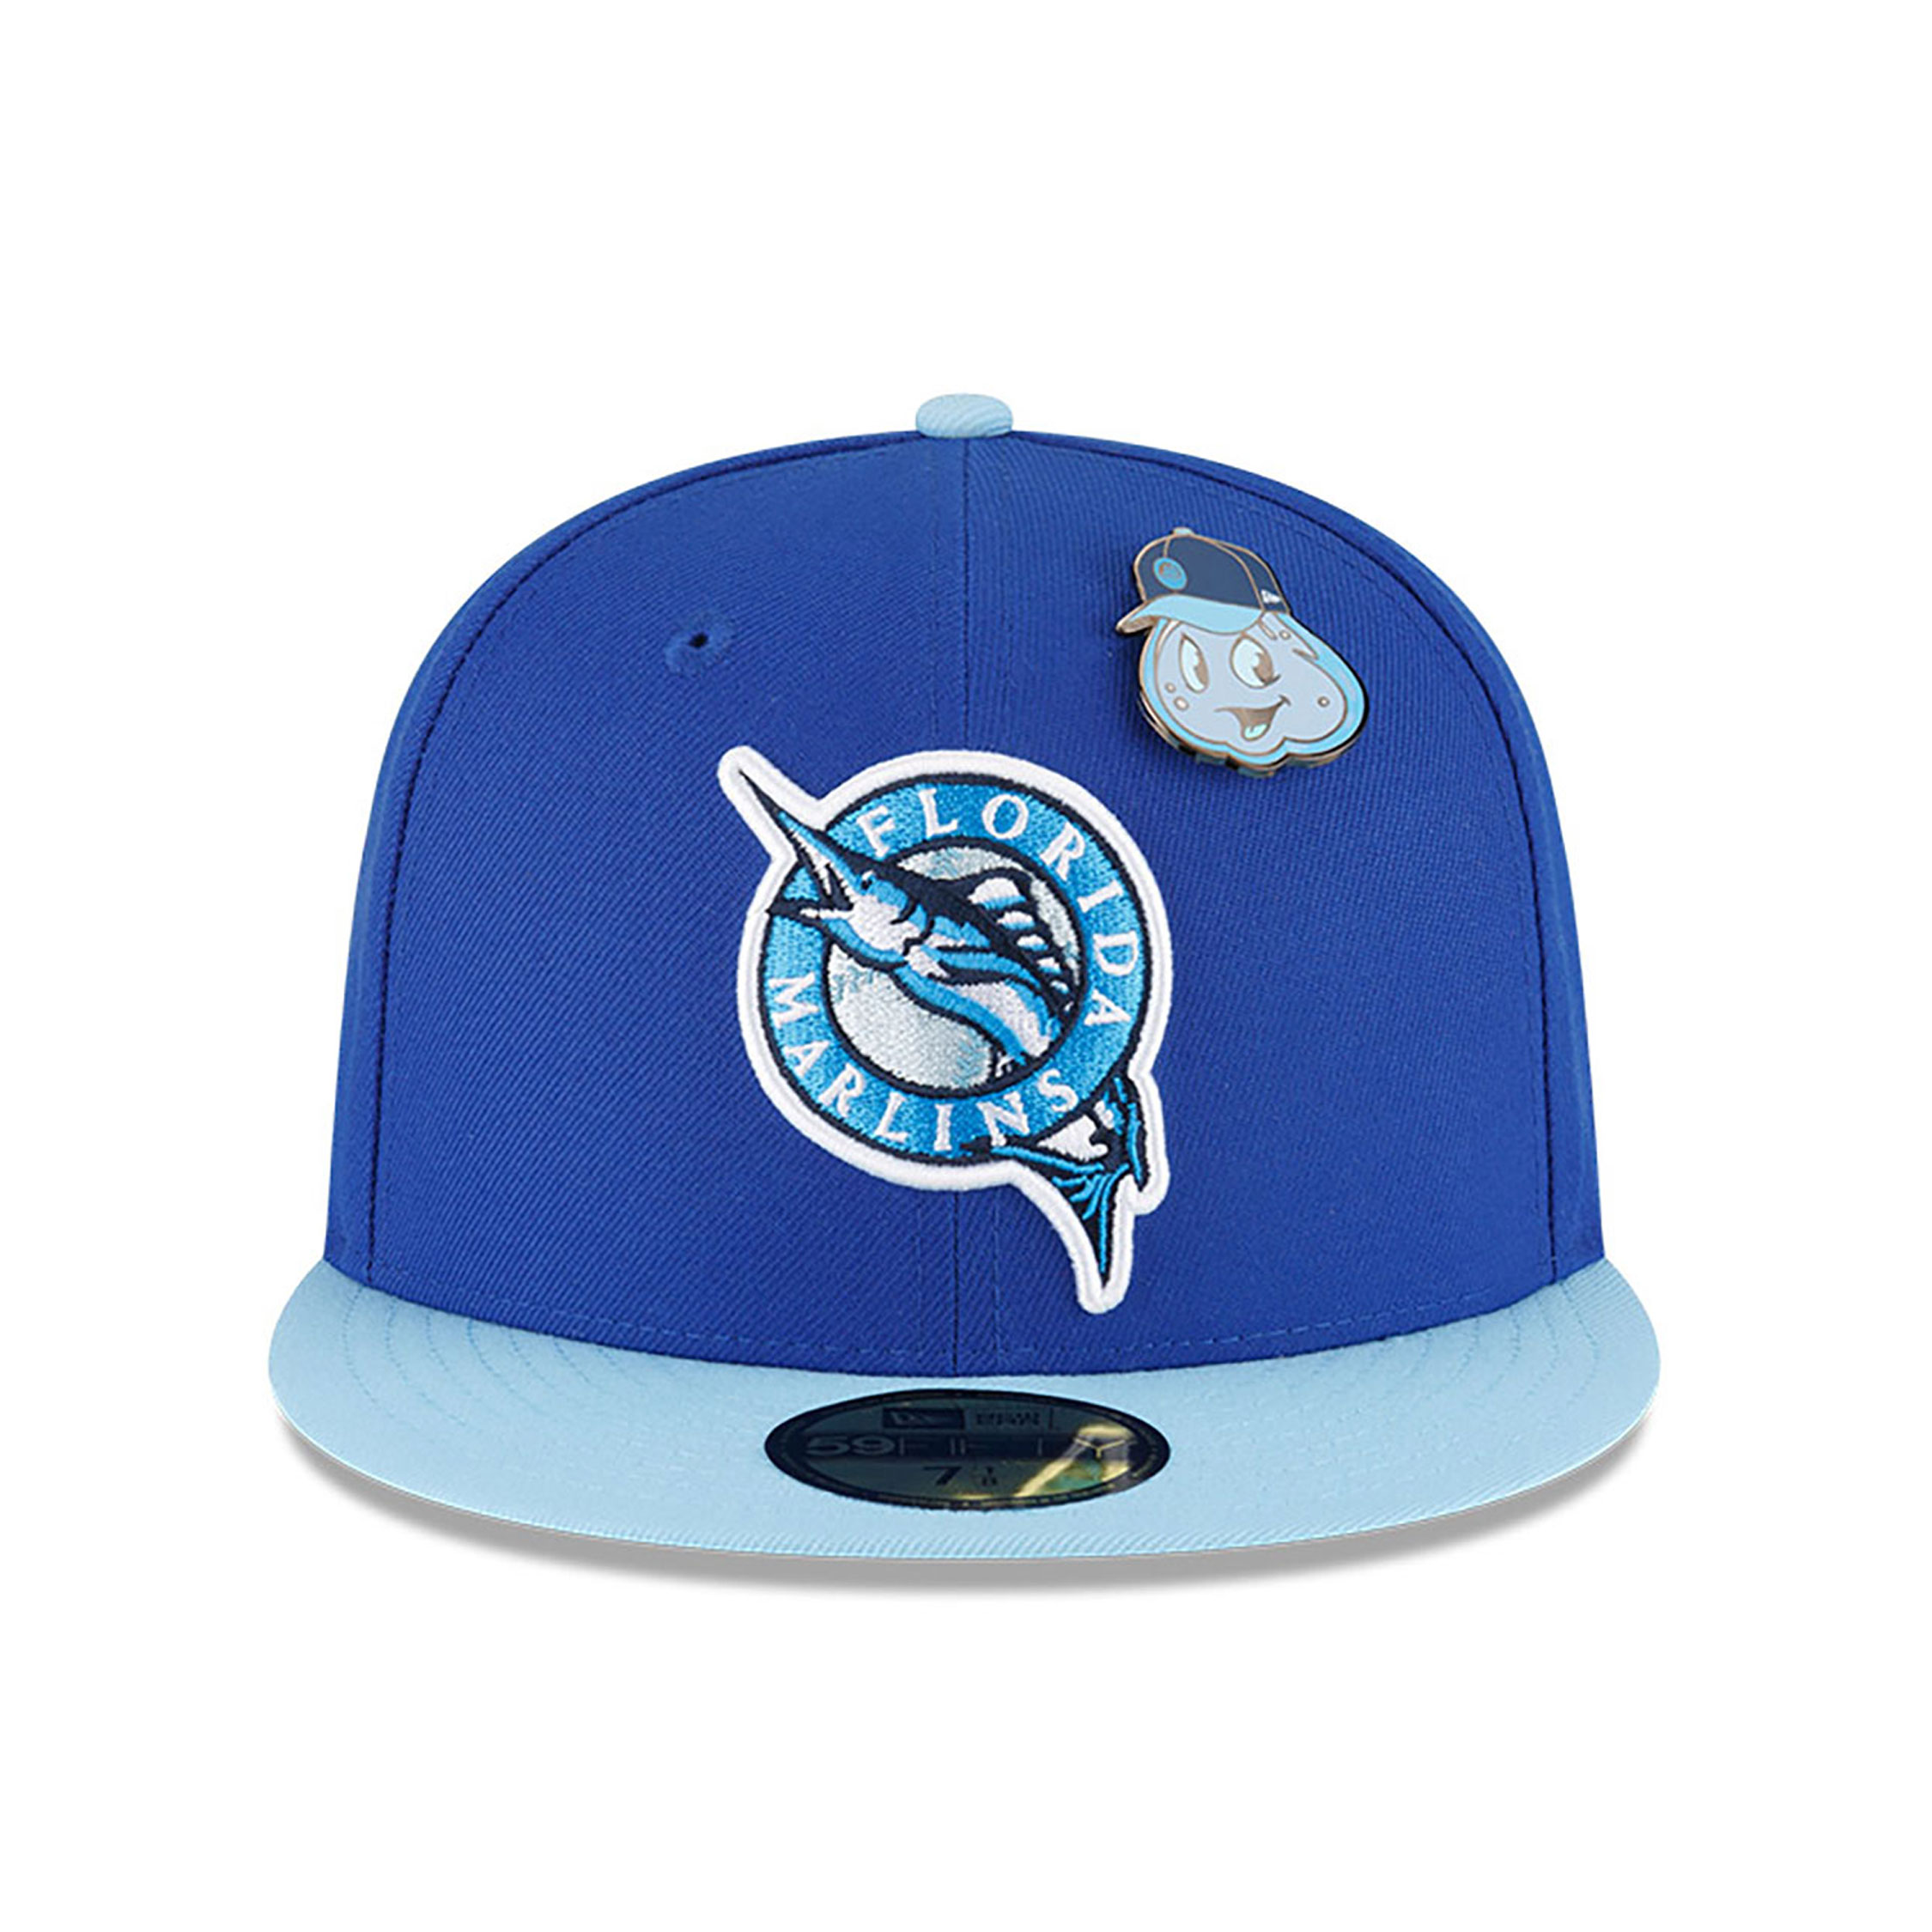 Miami Marlins The Elements Blue 59FIFTY Fitted Cap